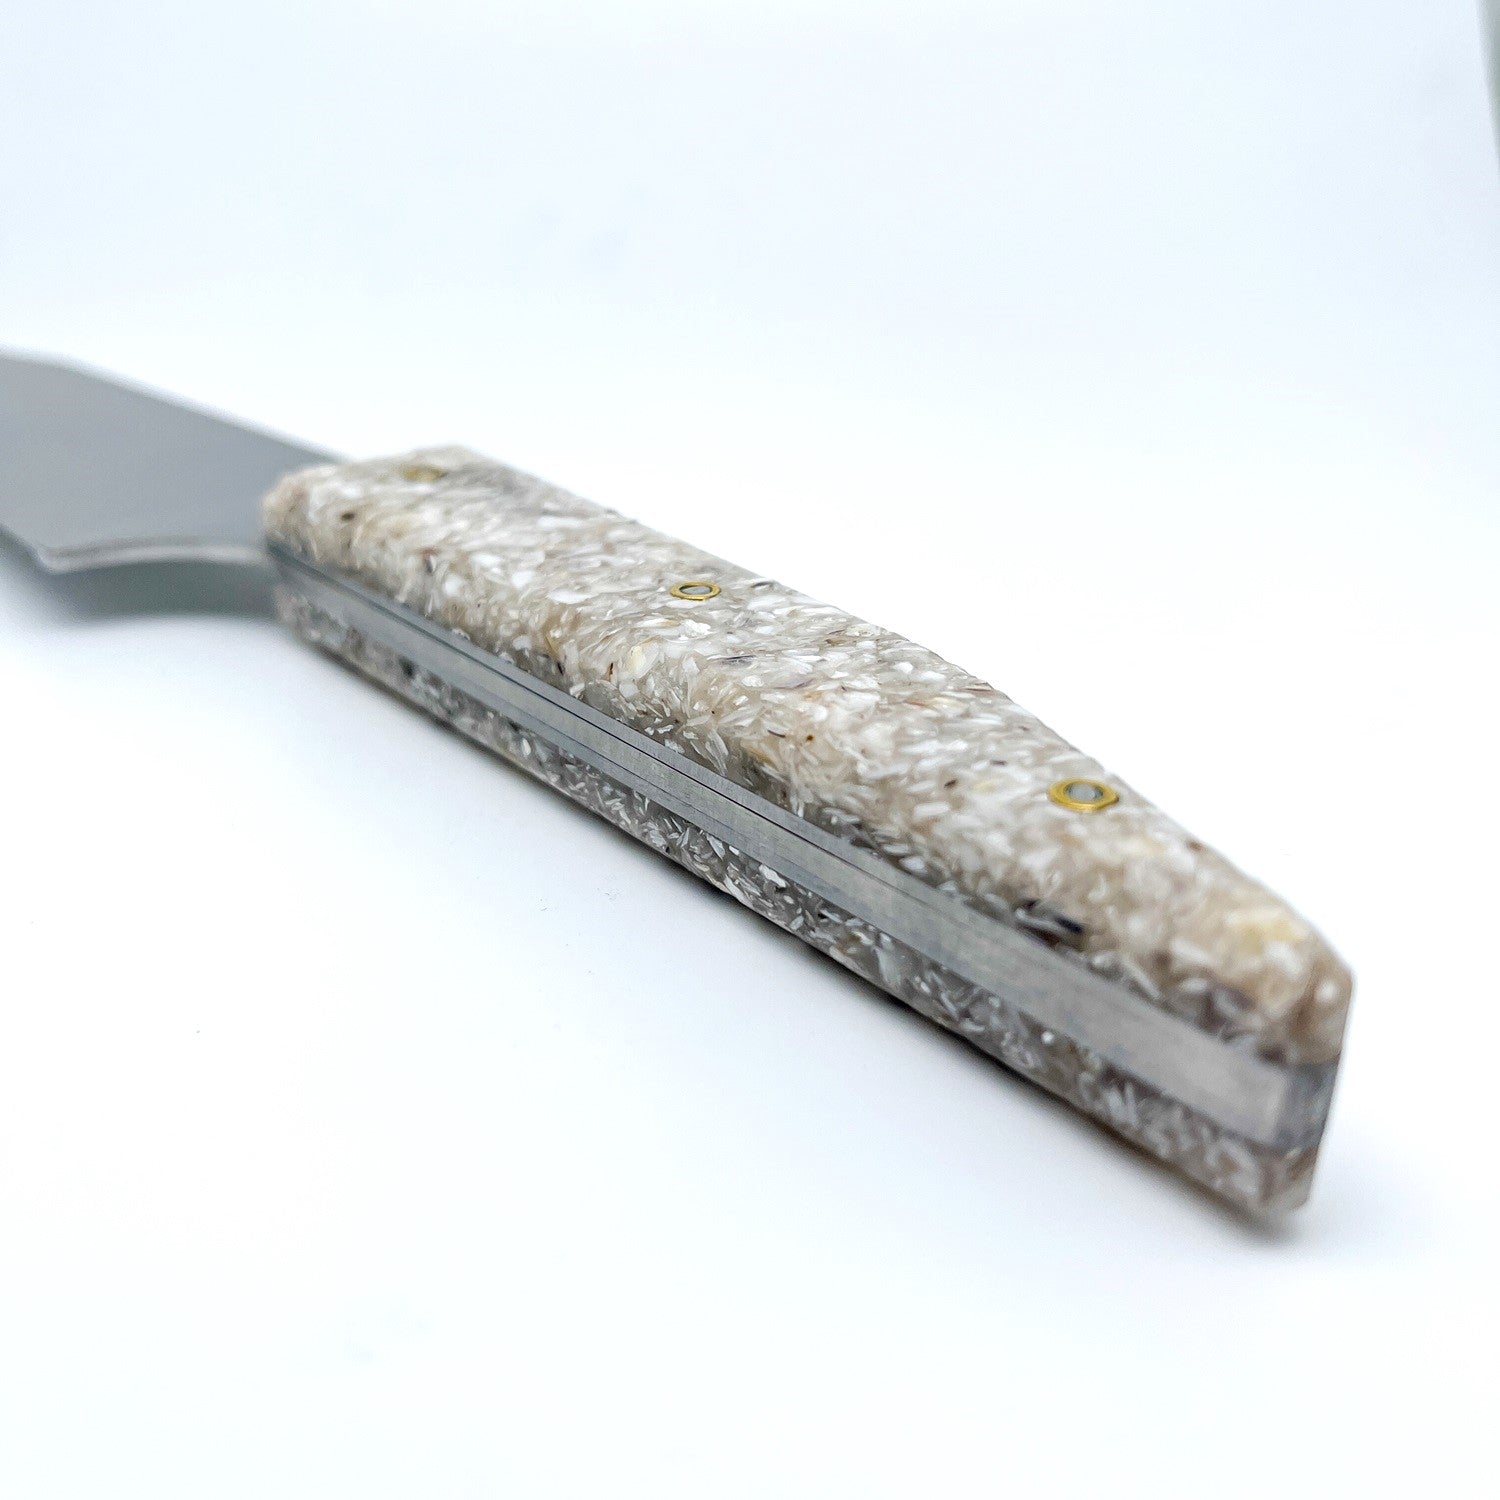 Chef's knife with oyster shell handle